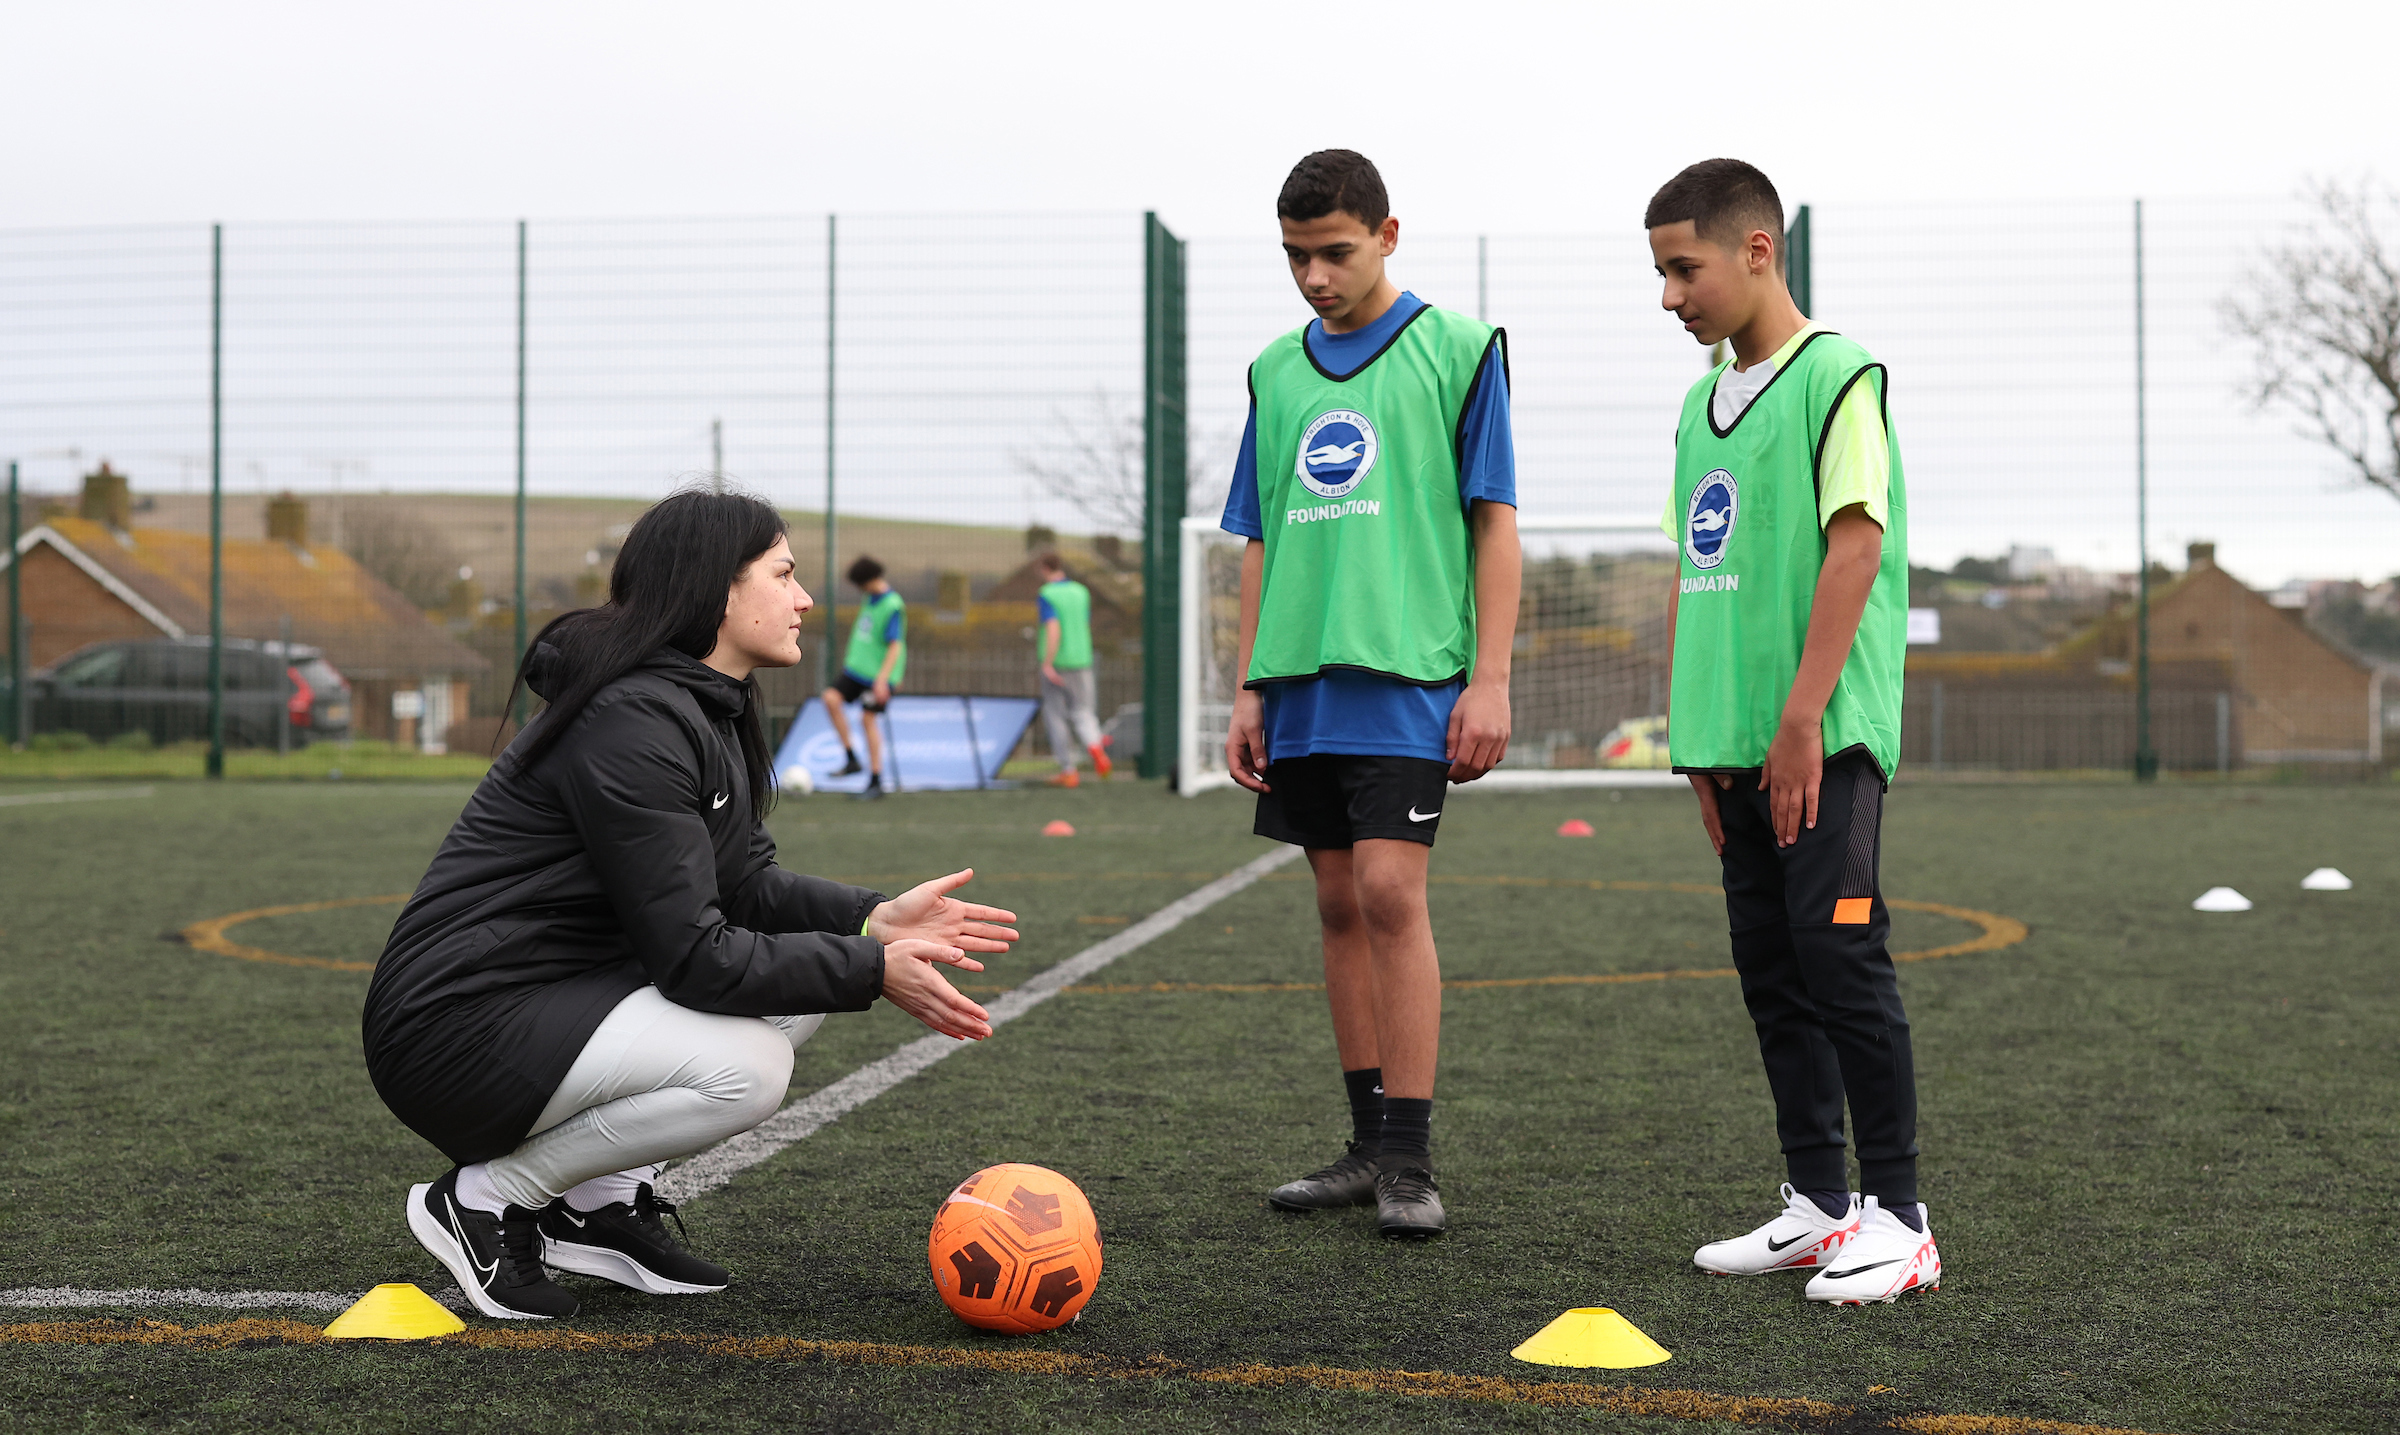 Dejana Stefanovic crouches to talk to two youngsters in BHAFC bibs.